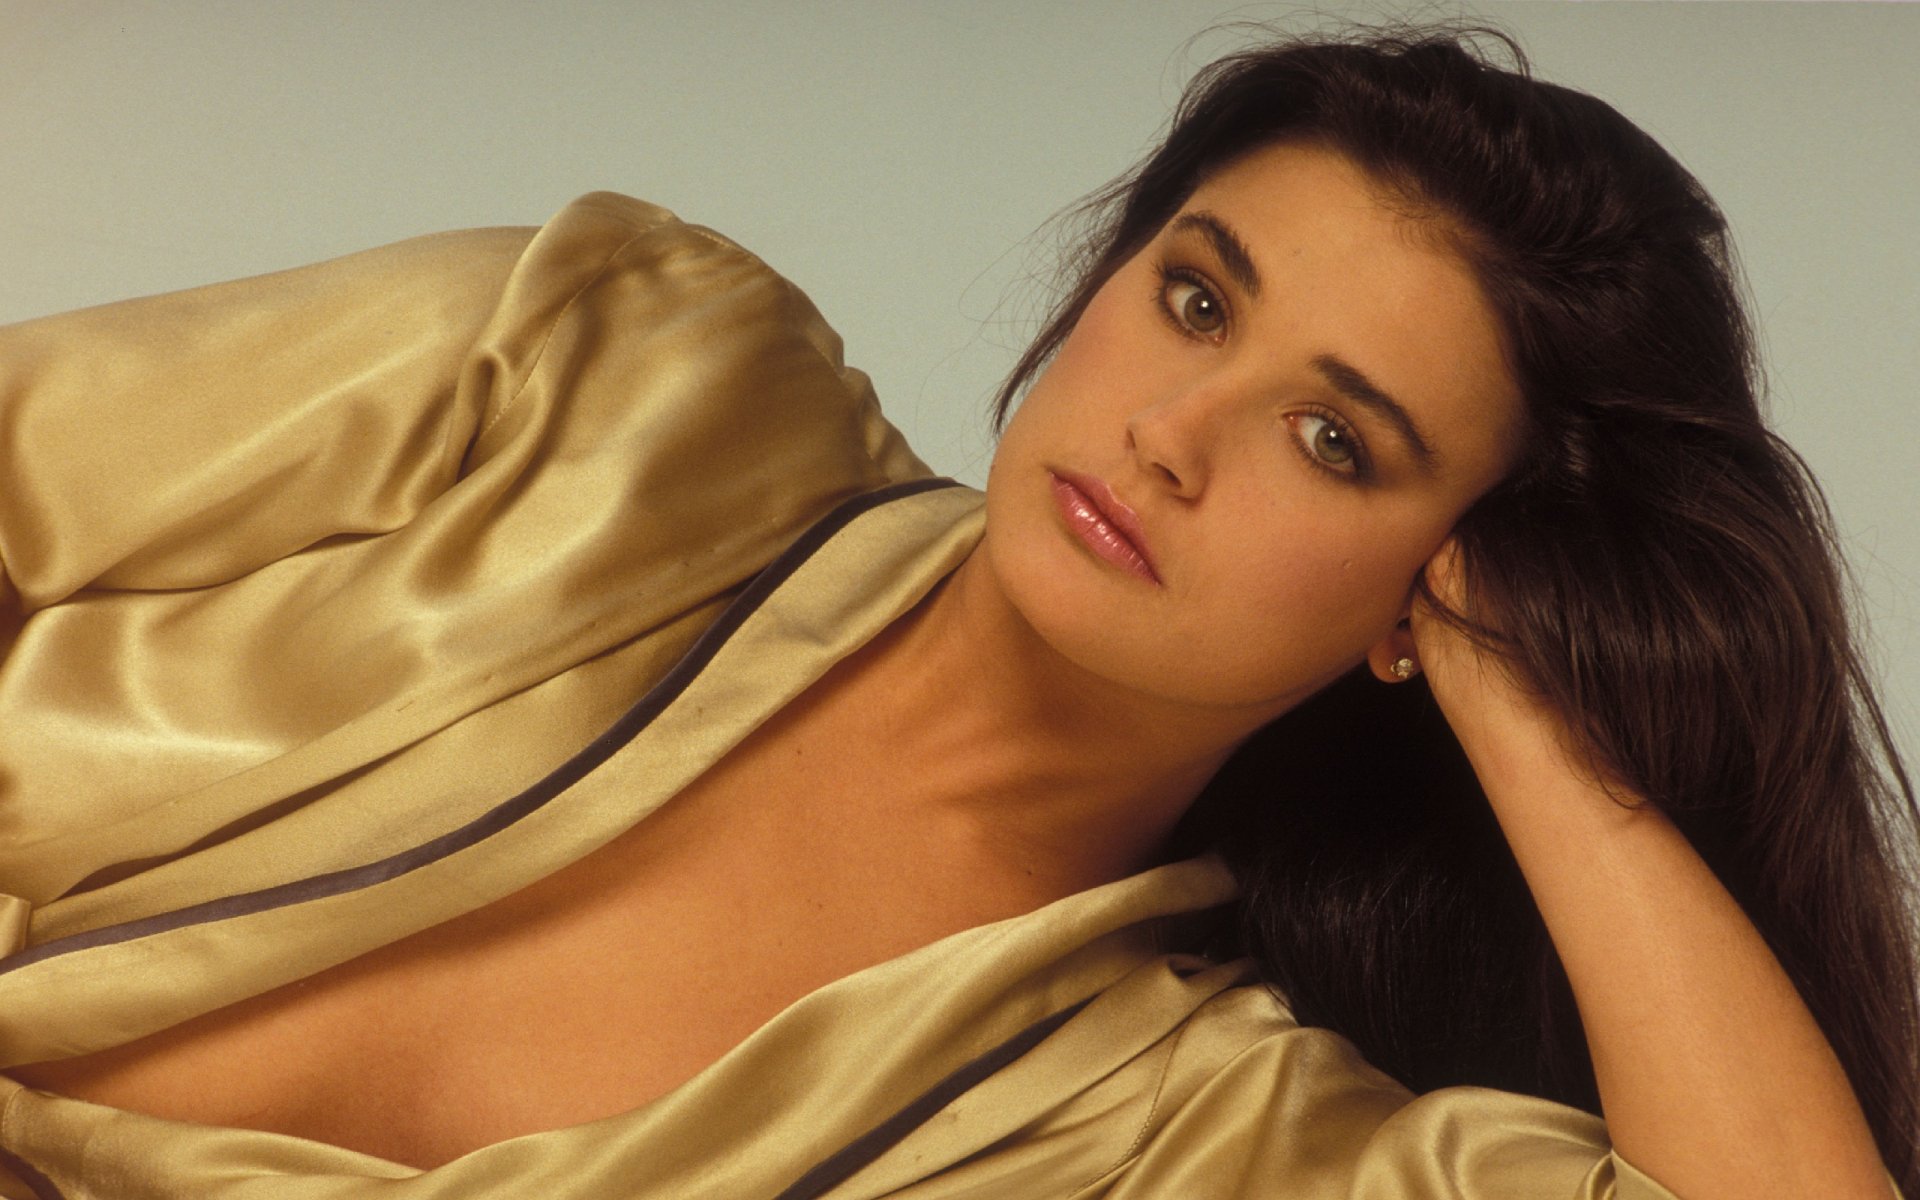  Demi  Moore  Full HD Wallpaper  and Background Image 